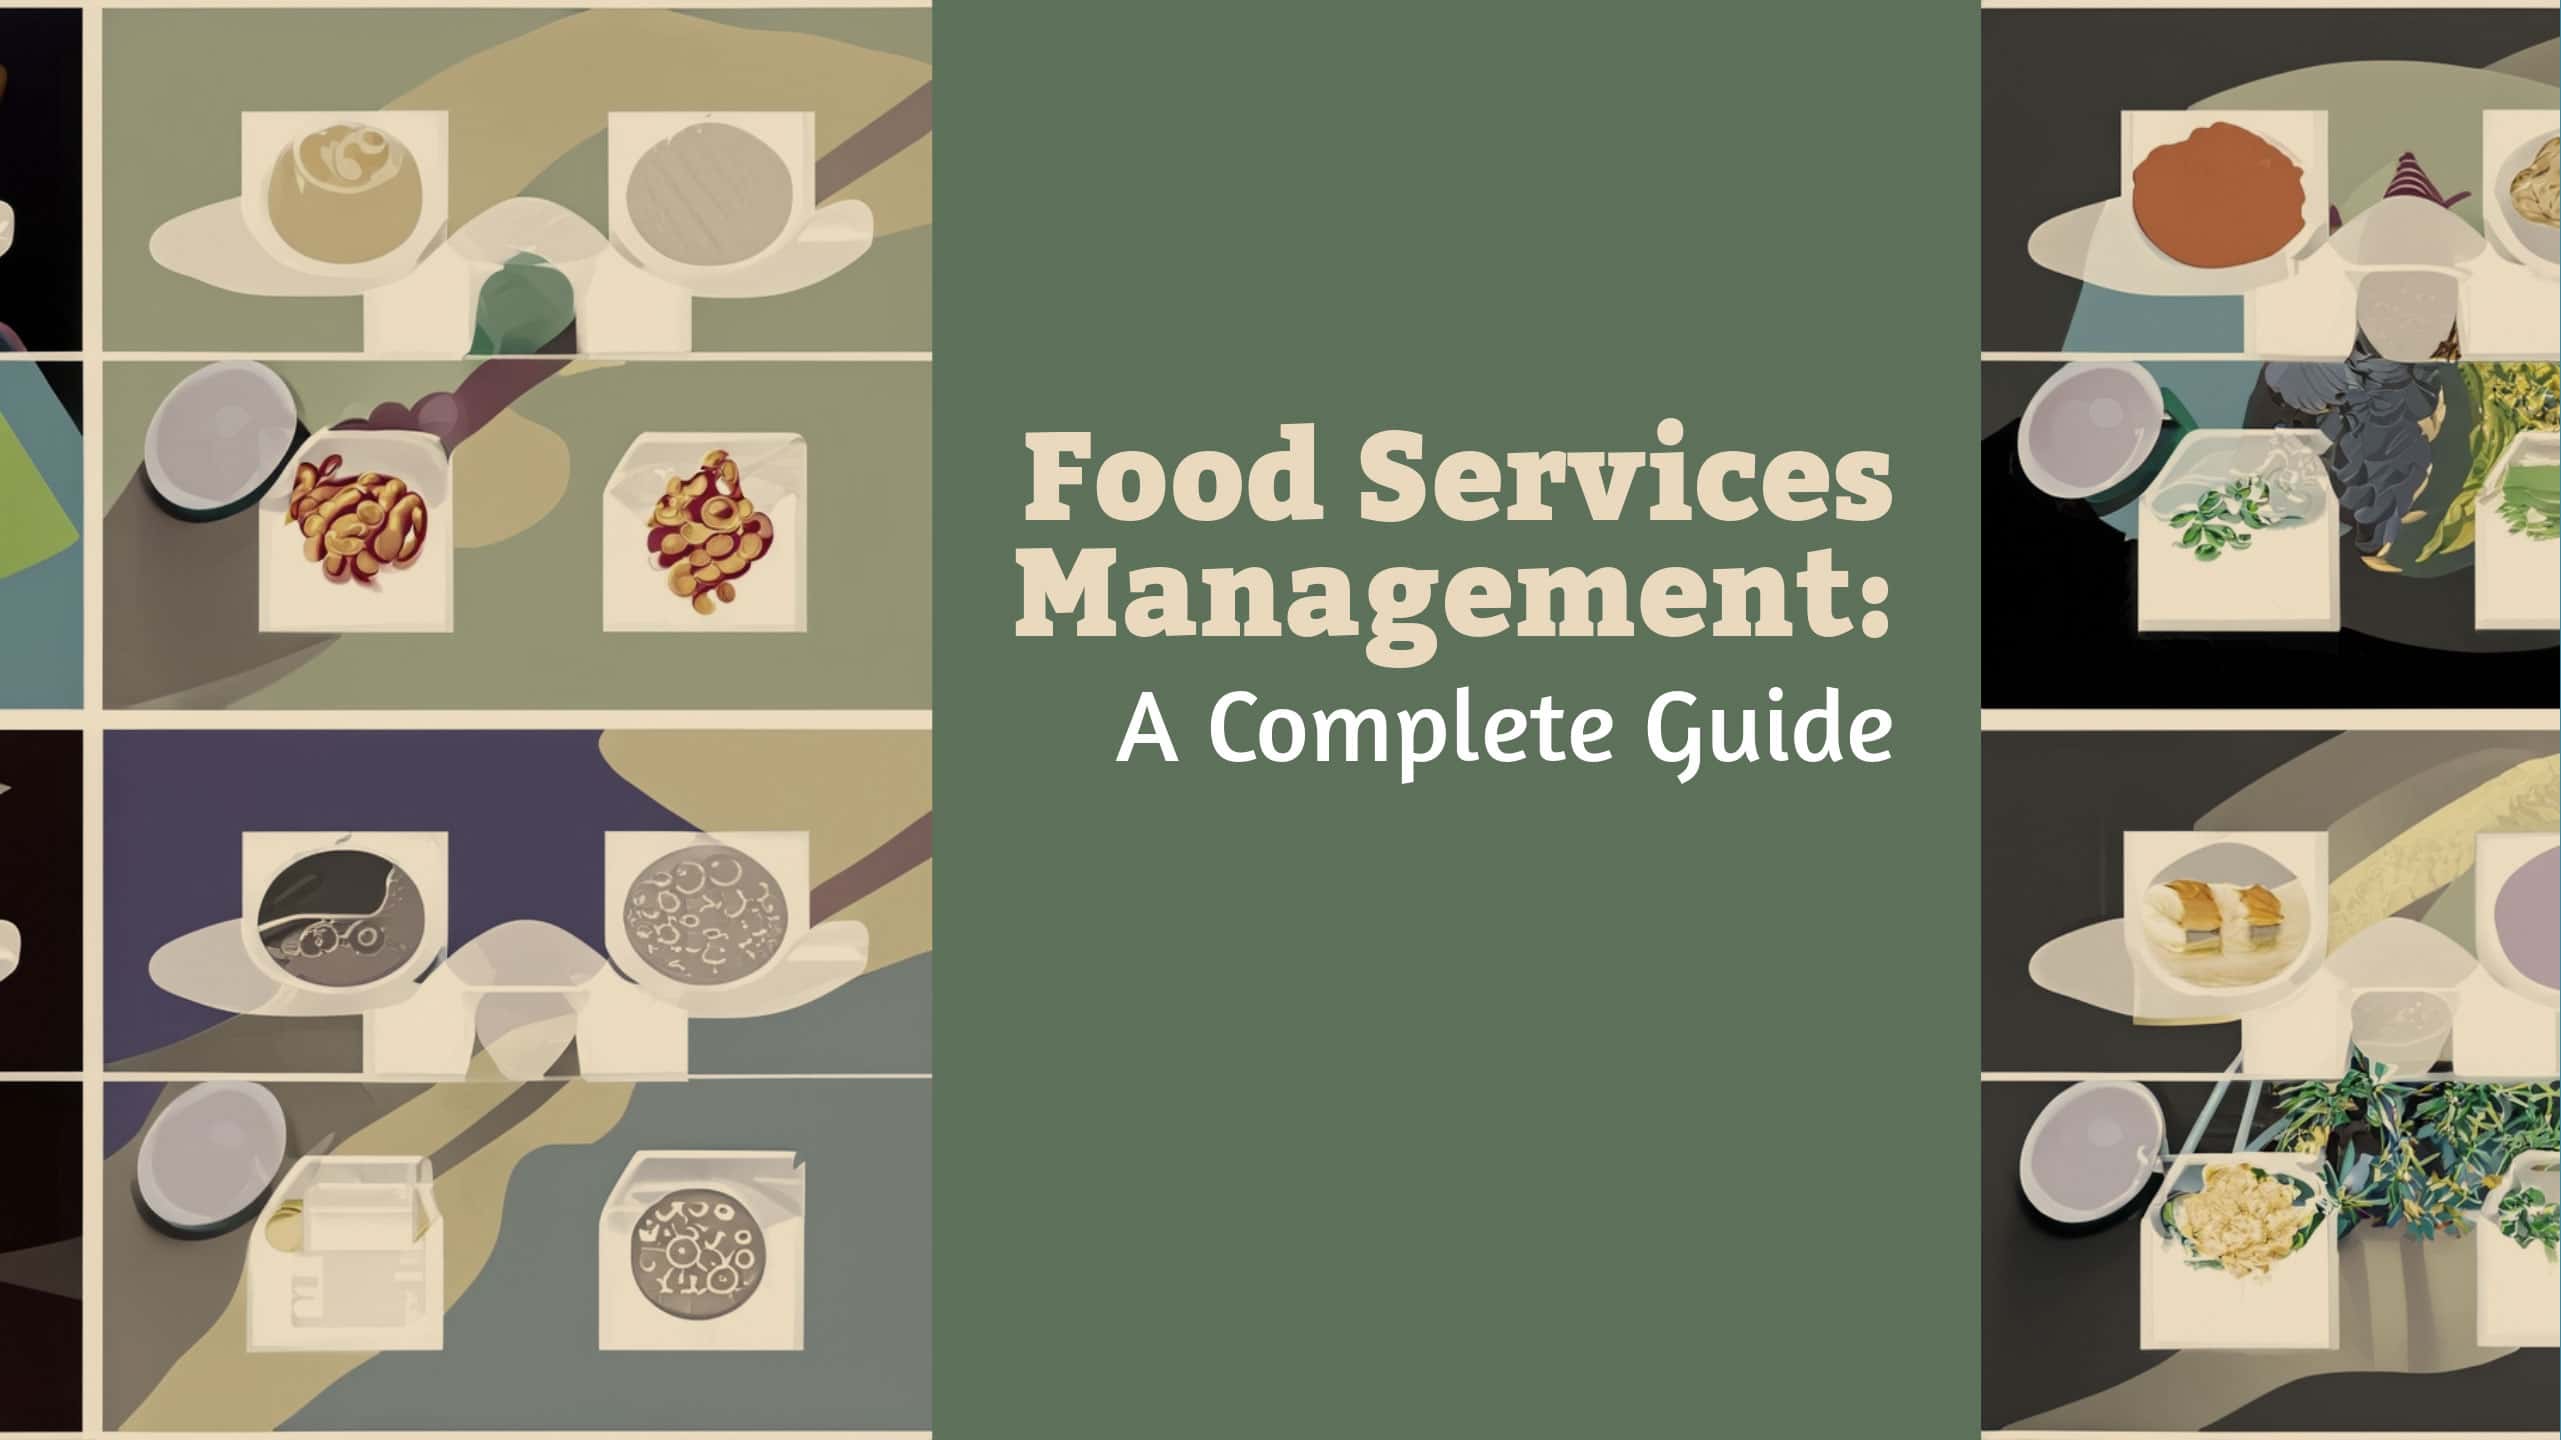 Food Services Management: A Complete Guide